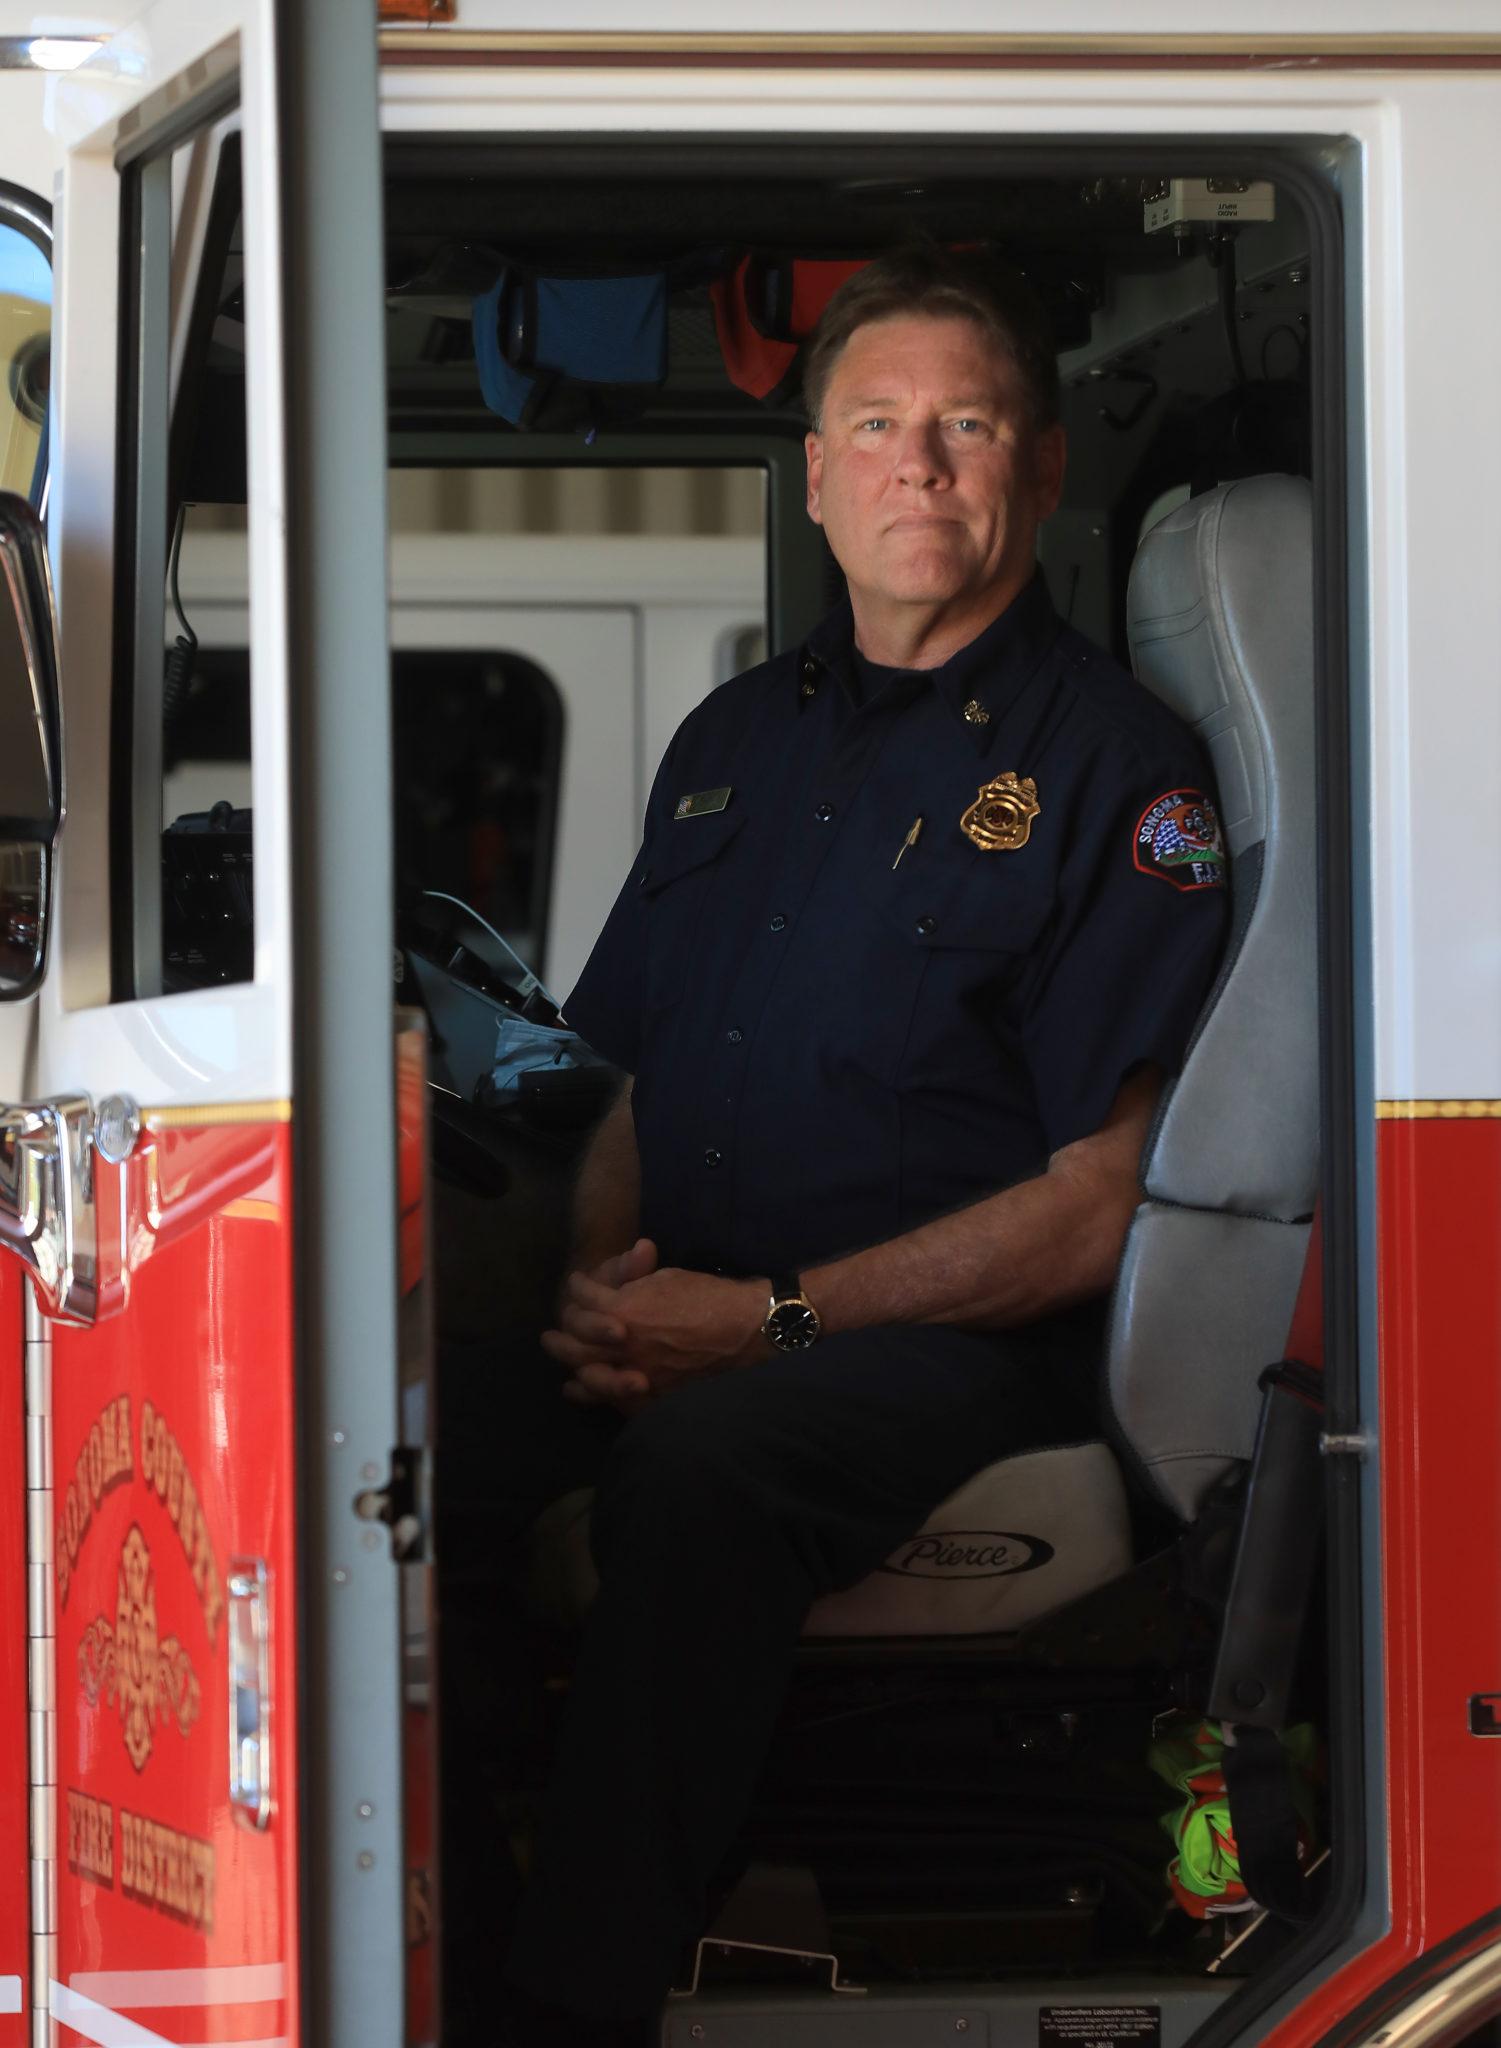 Sonoma County Fire District chief Mark Heine at Windsor's station 1. Kent Porter / The Press Democrat) 2020